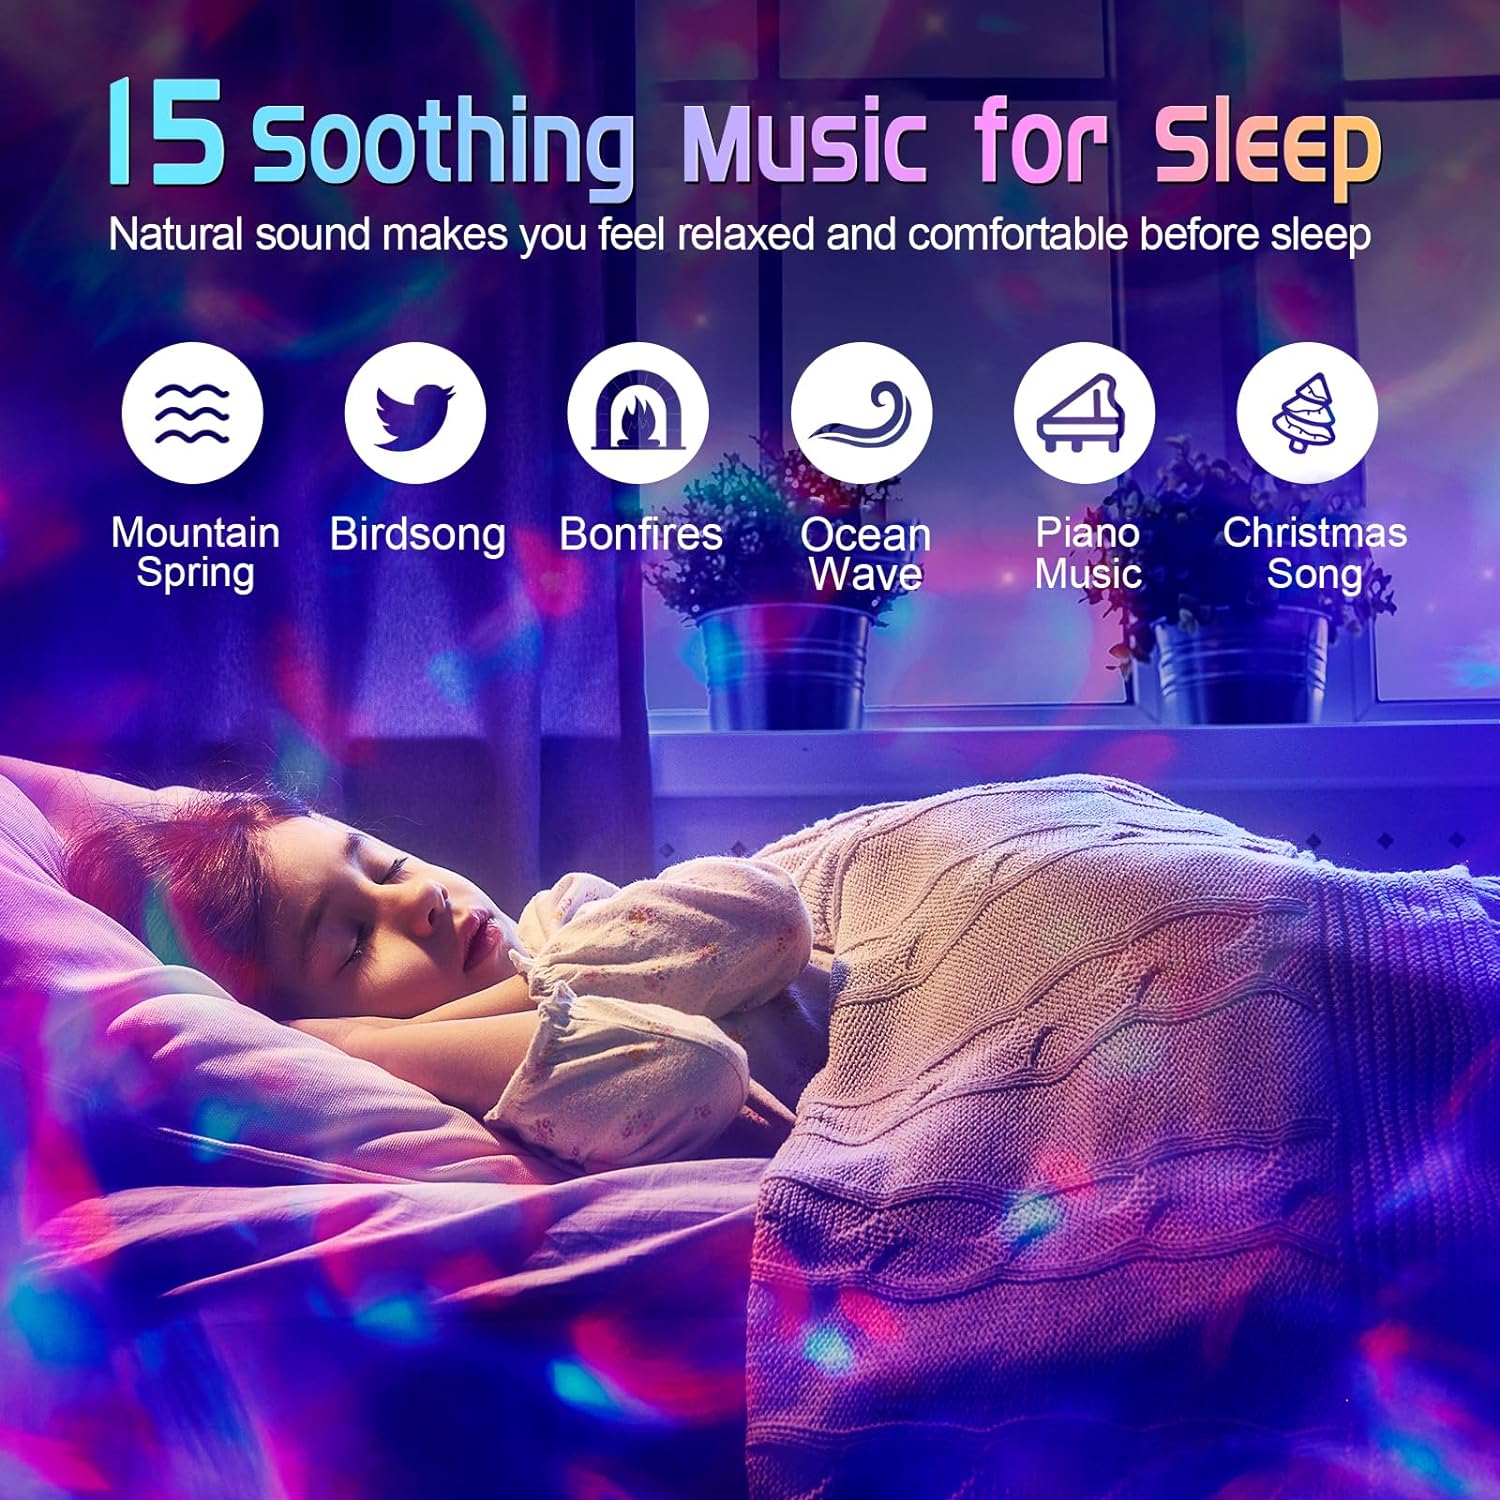 Galaxy Projector 20 Lighting Modes Star Projector, HiFi Bluetooth Speaker Galaxy Projector Light, 6 White Noise Sensory Lights, Remote & Timer Galaxy Light Projector for Bedroom Gifts for Room Decor [Energy Class A] 3